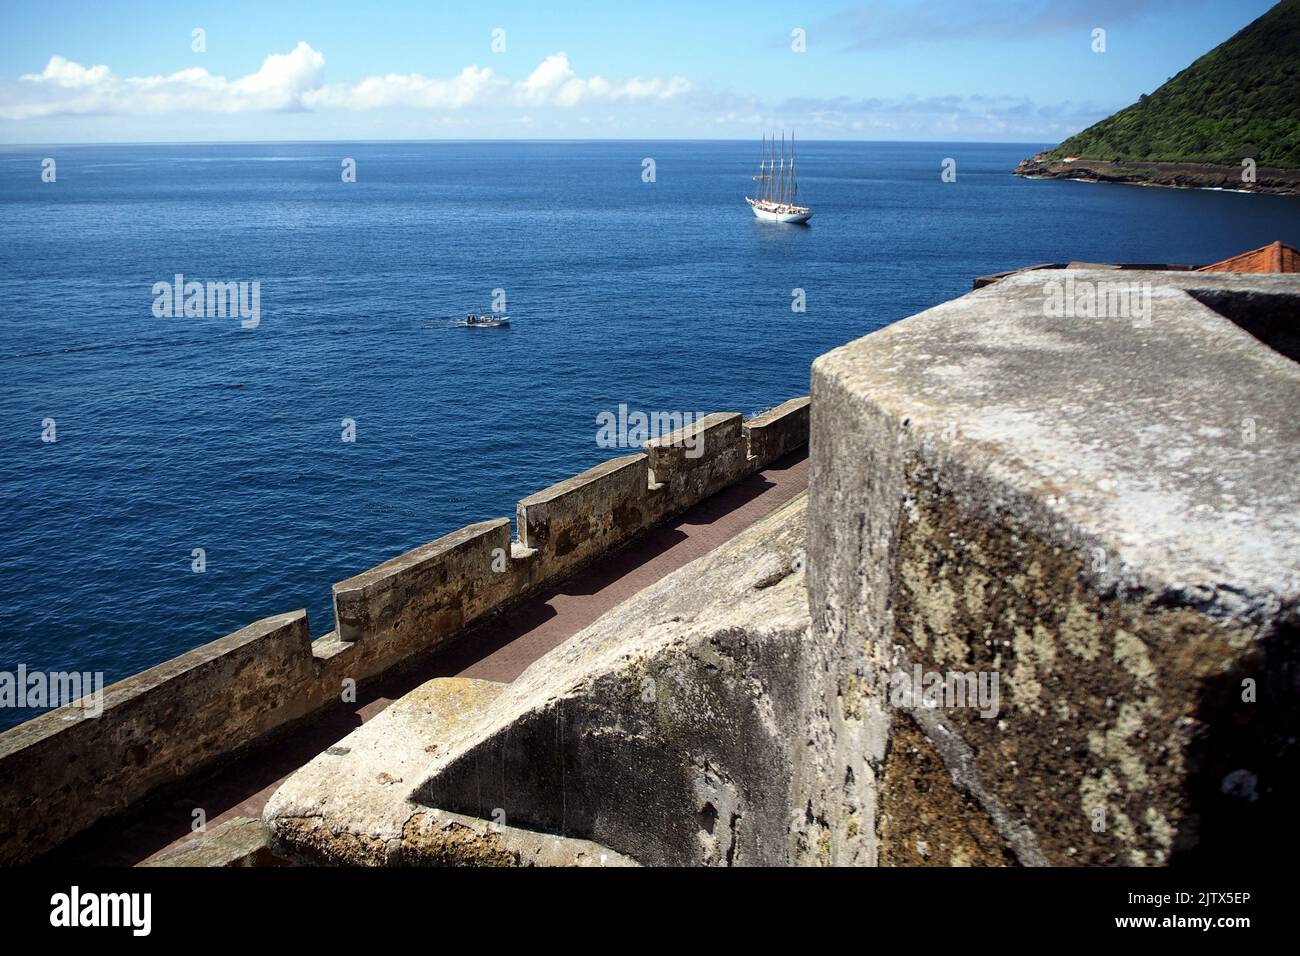 Ocean view from the Fort of Sao Sebastiao, part of the corner bastion, tall ship anchored offshore, Angra do Heroismo, Terceira, Portugal Stock Photo